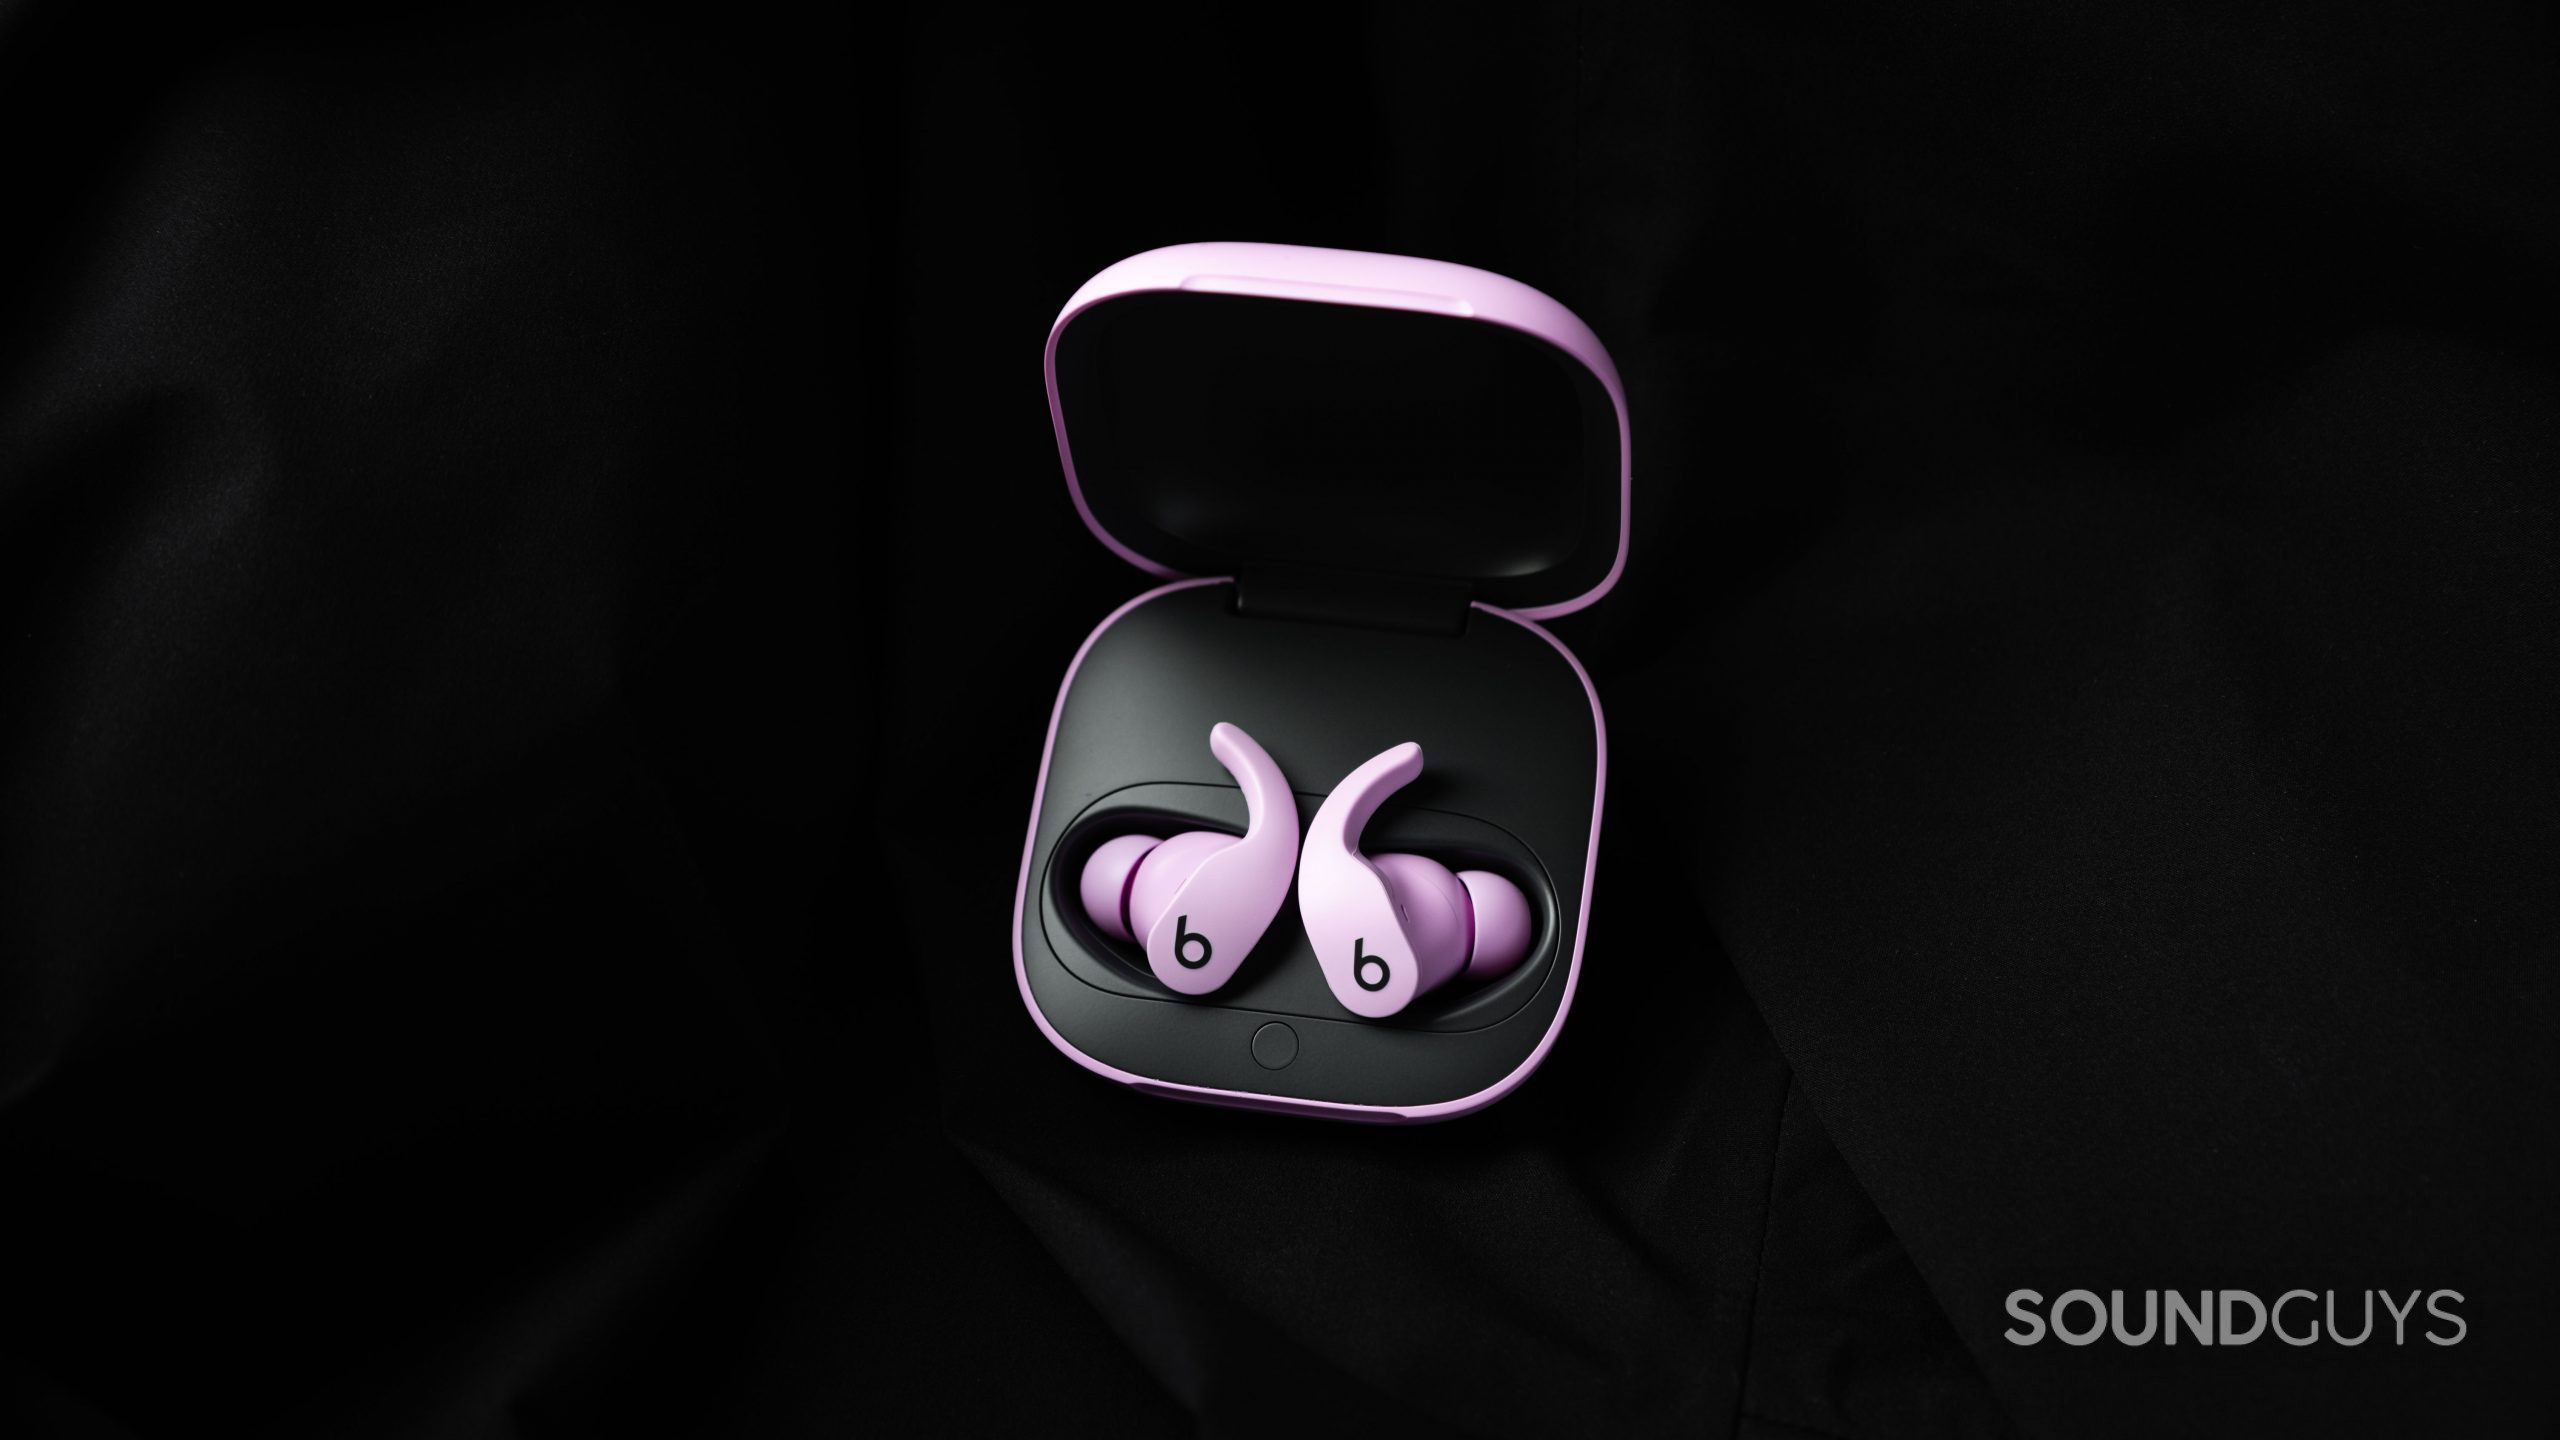 The Beats Fit Pro noise canceling true wireless earbuds in purple lay in the open charging case against a black fabric background.